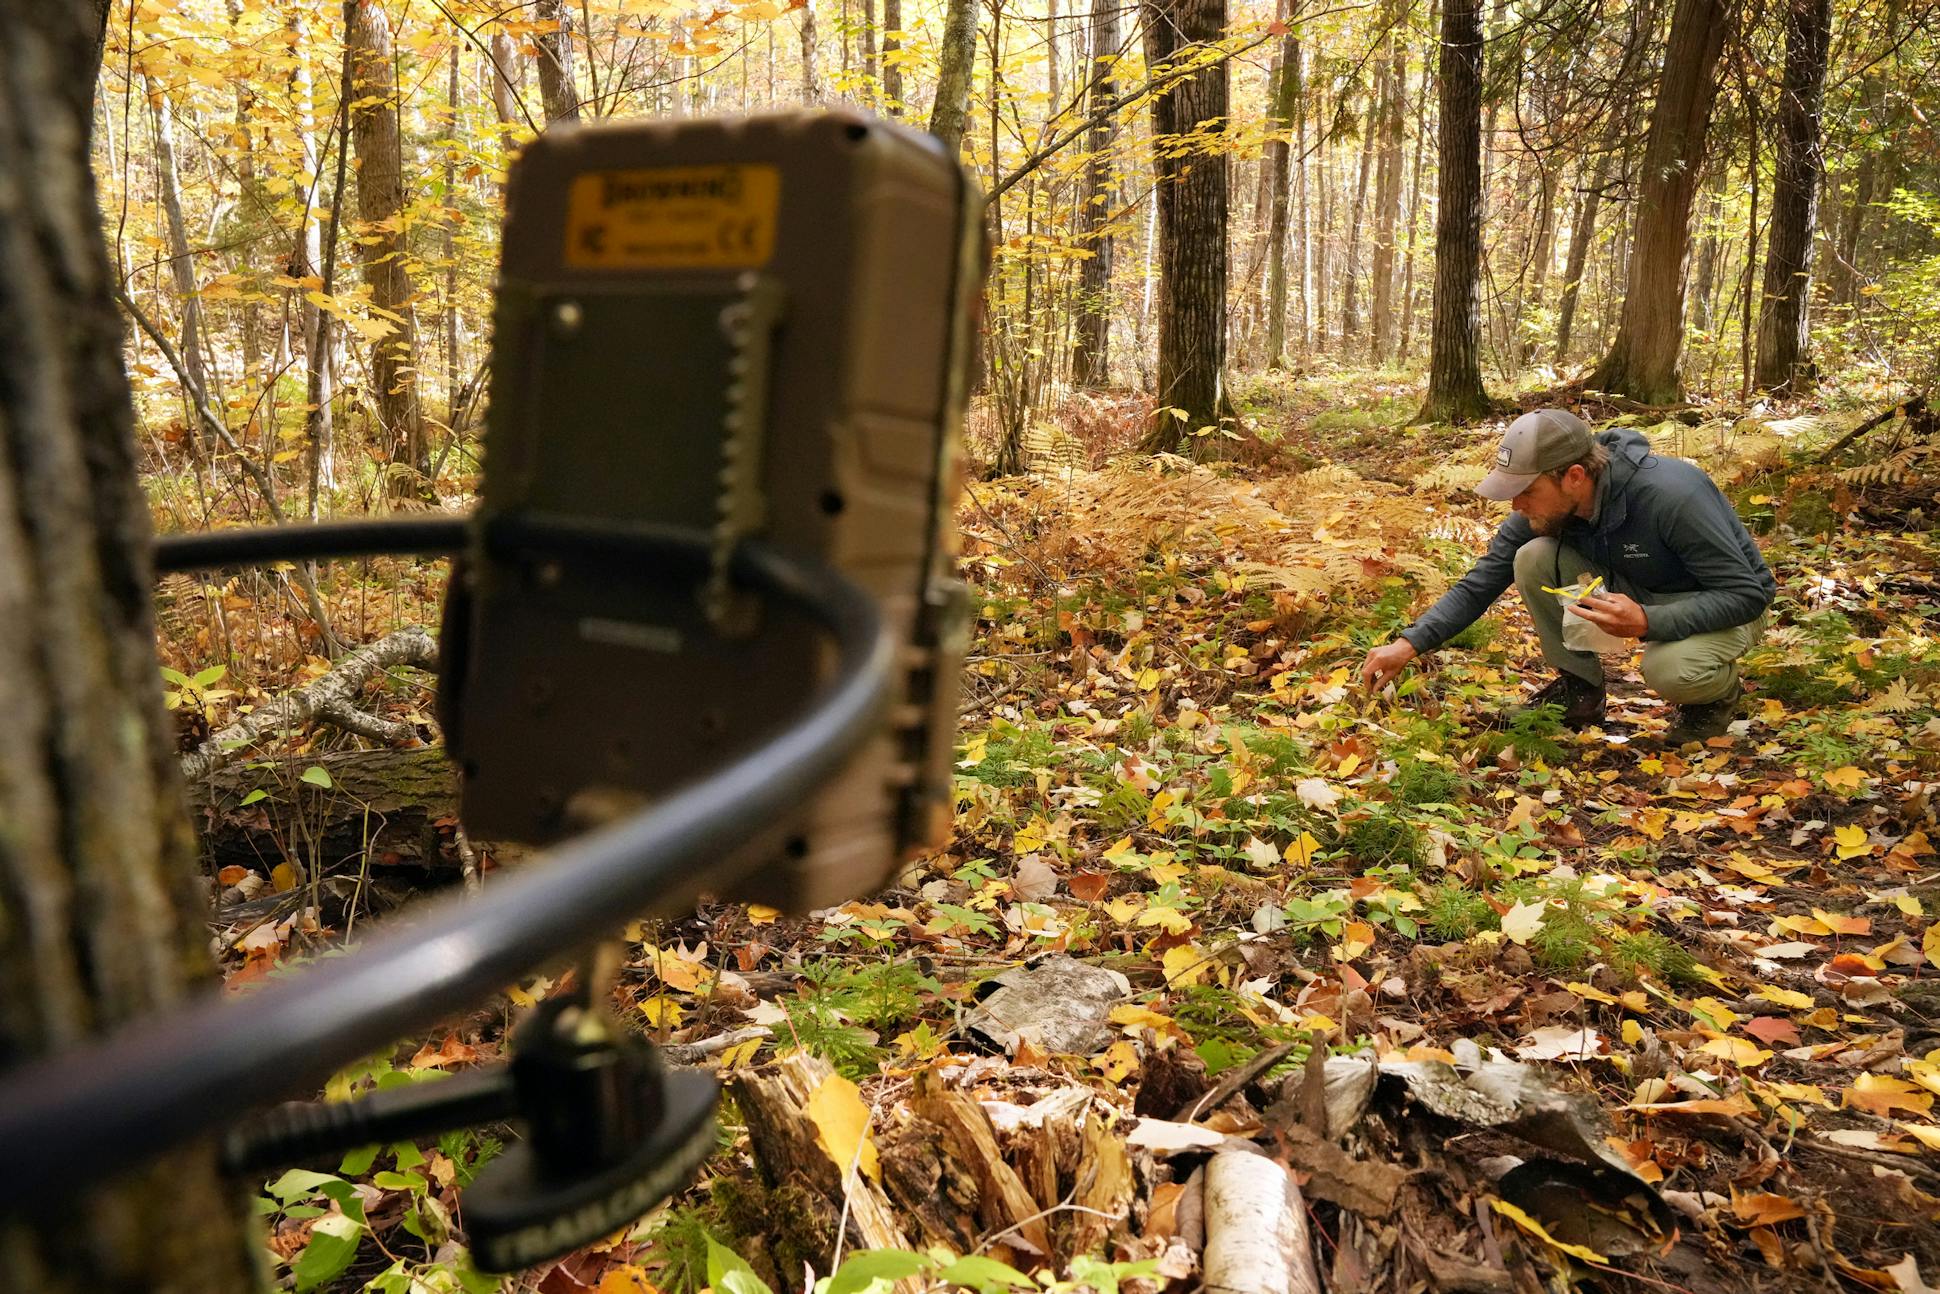 Homkes added a scent to the ground to encourage animals to stop in front of one of the 175-200 trail cameras the team has deployed at any given time.